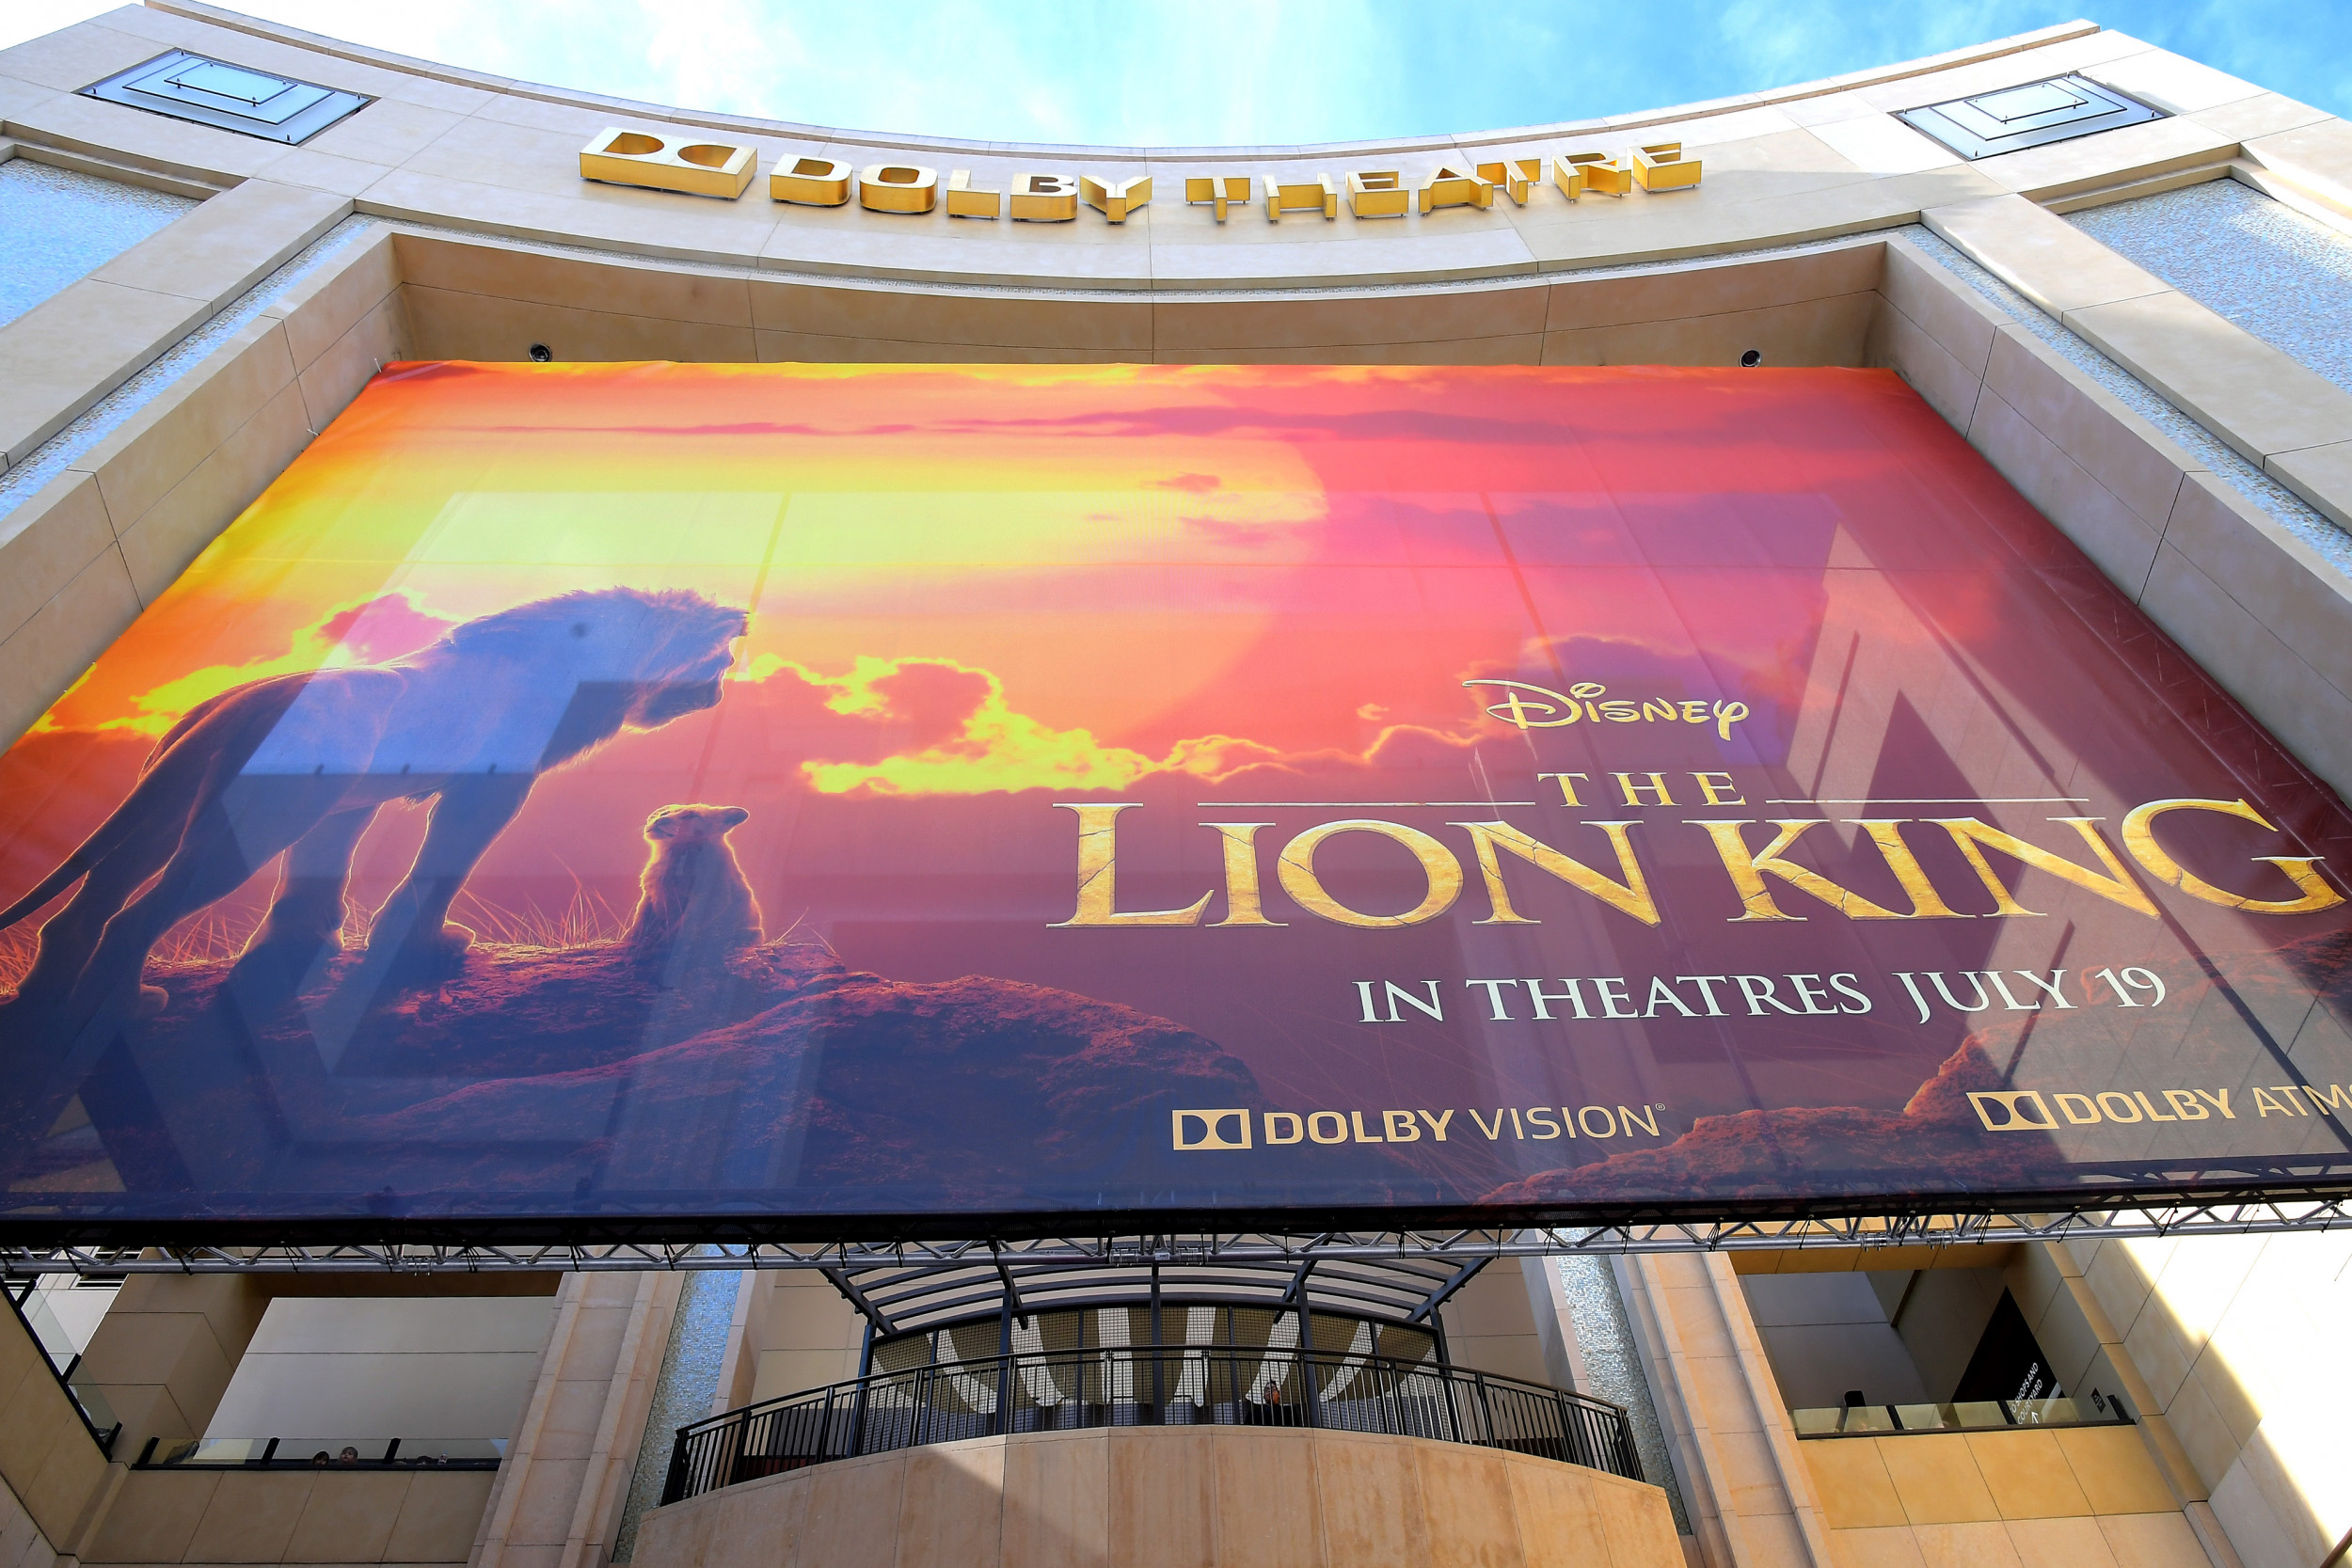 The Lion King Premiere How To Buy Tickets For Disney Movie Remake